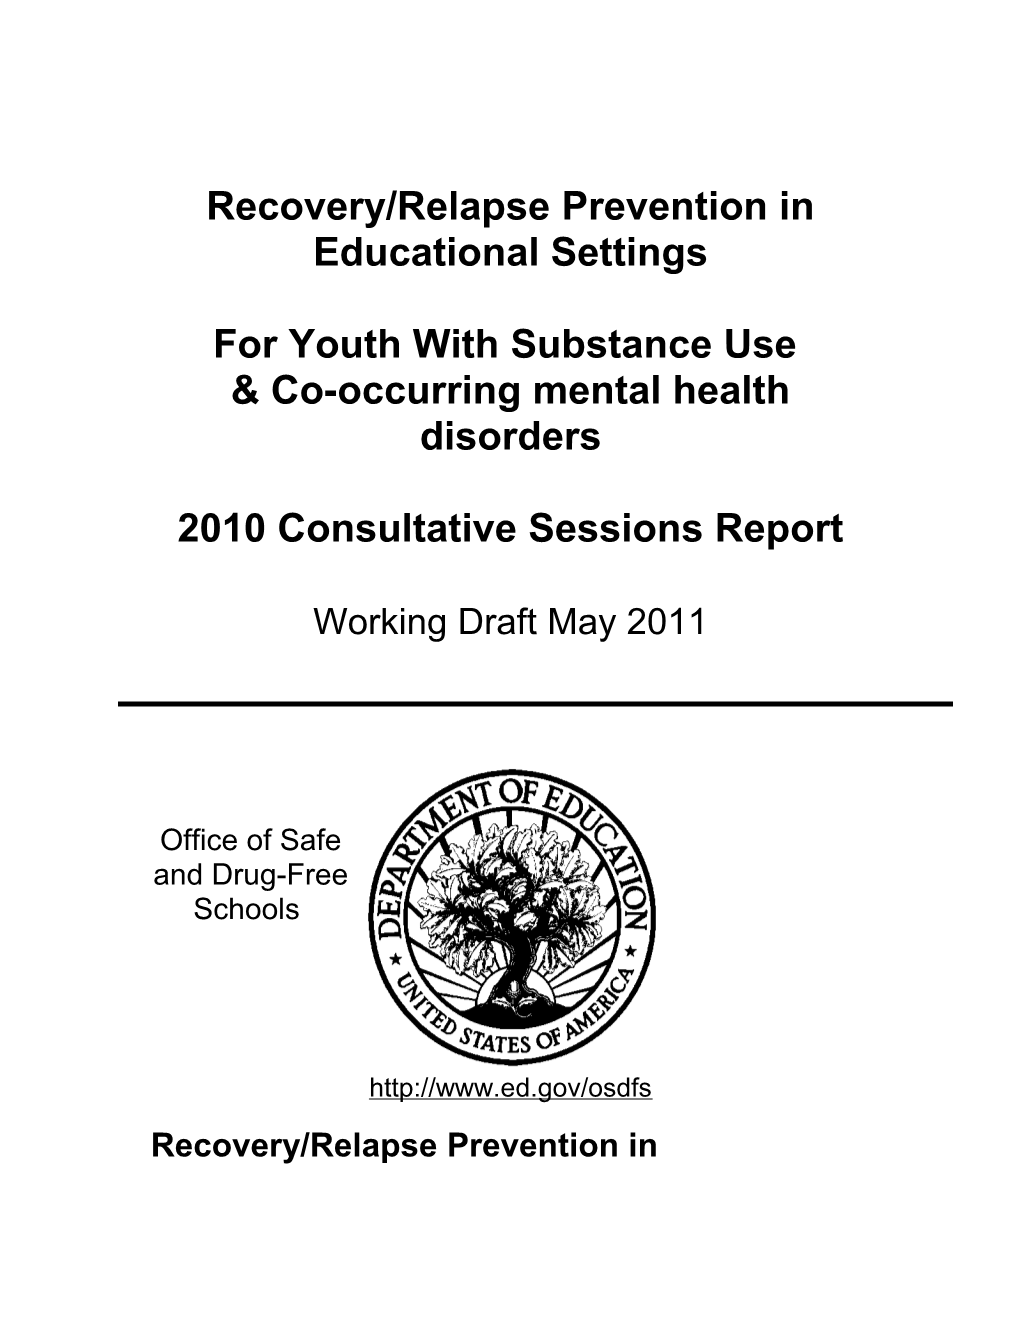 Recovery/Relapse Prevention in Educational Settings for Youth with Substance Use & Co-Occurring